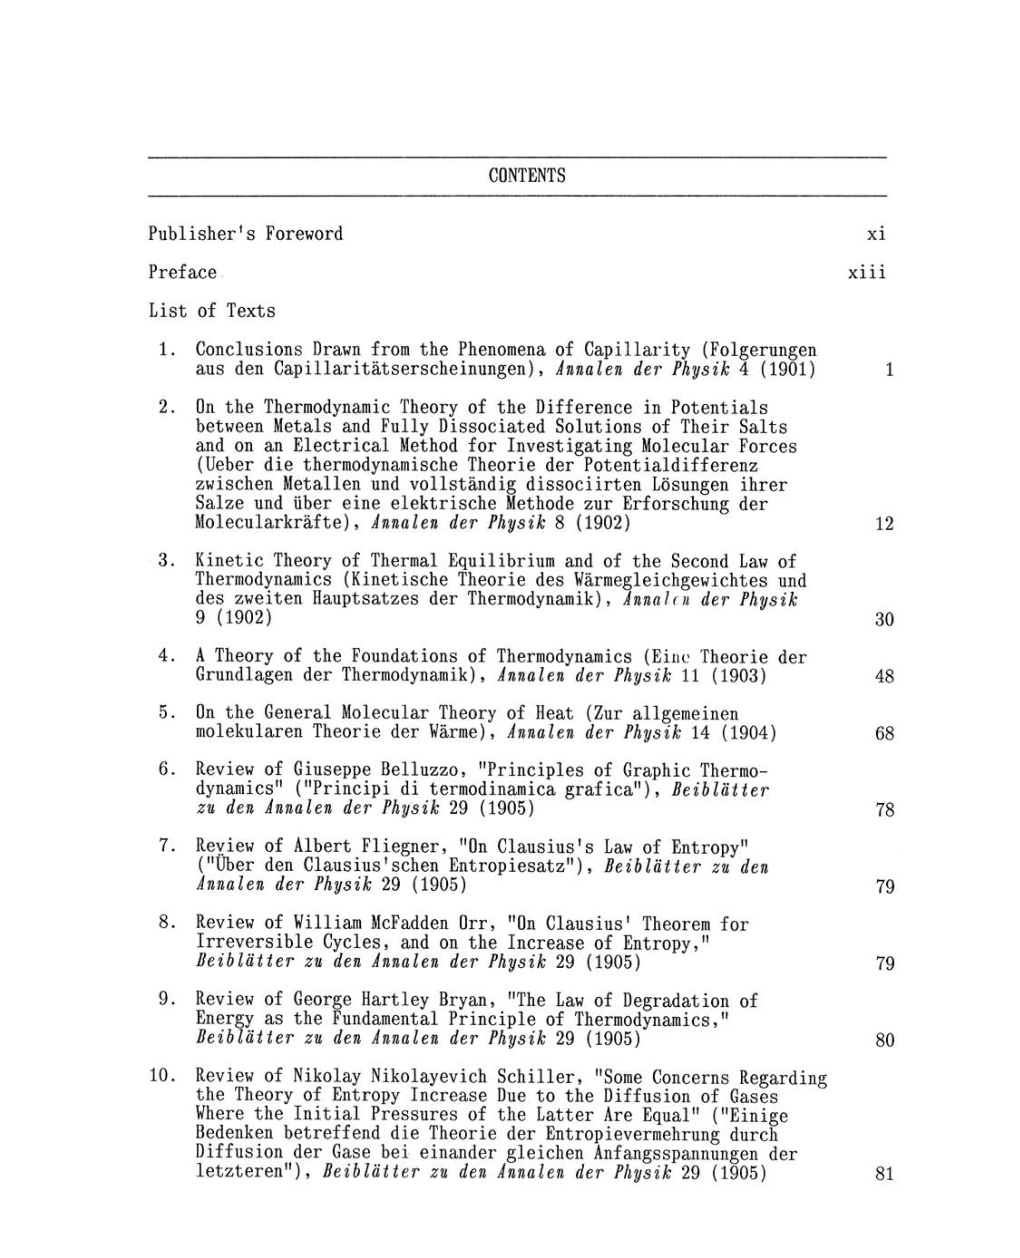 Volume 2: The Swiss Years: Writings, 1900-1909 (English translation supplement) page v